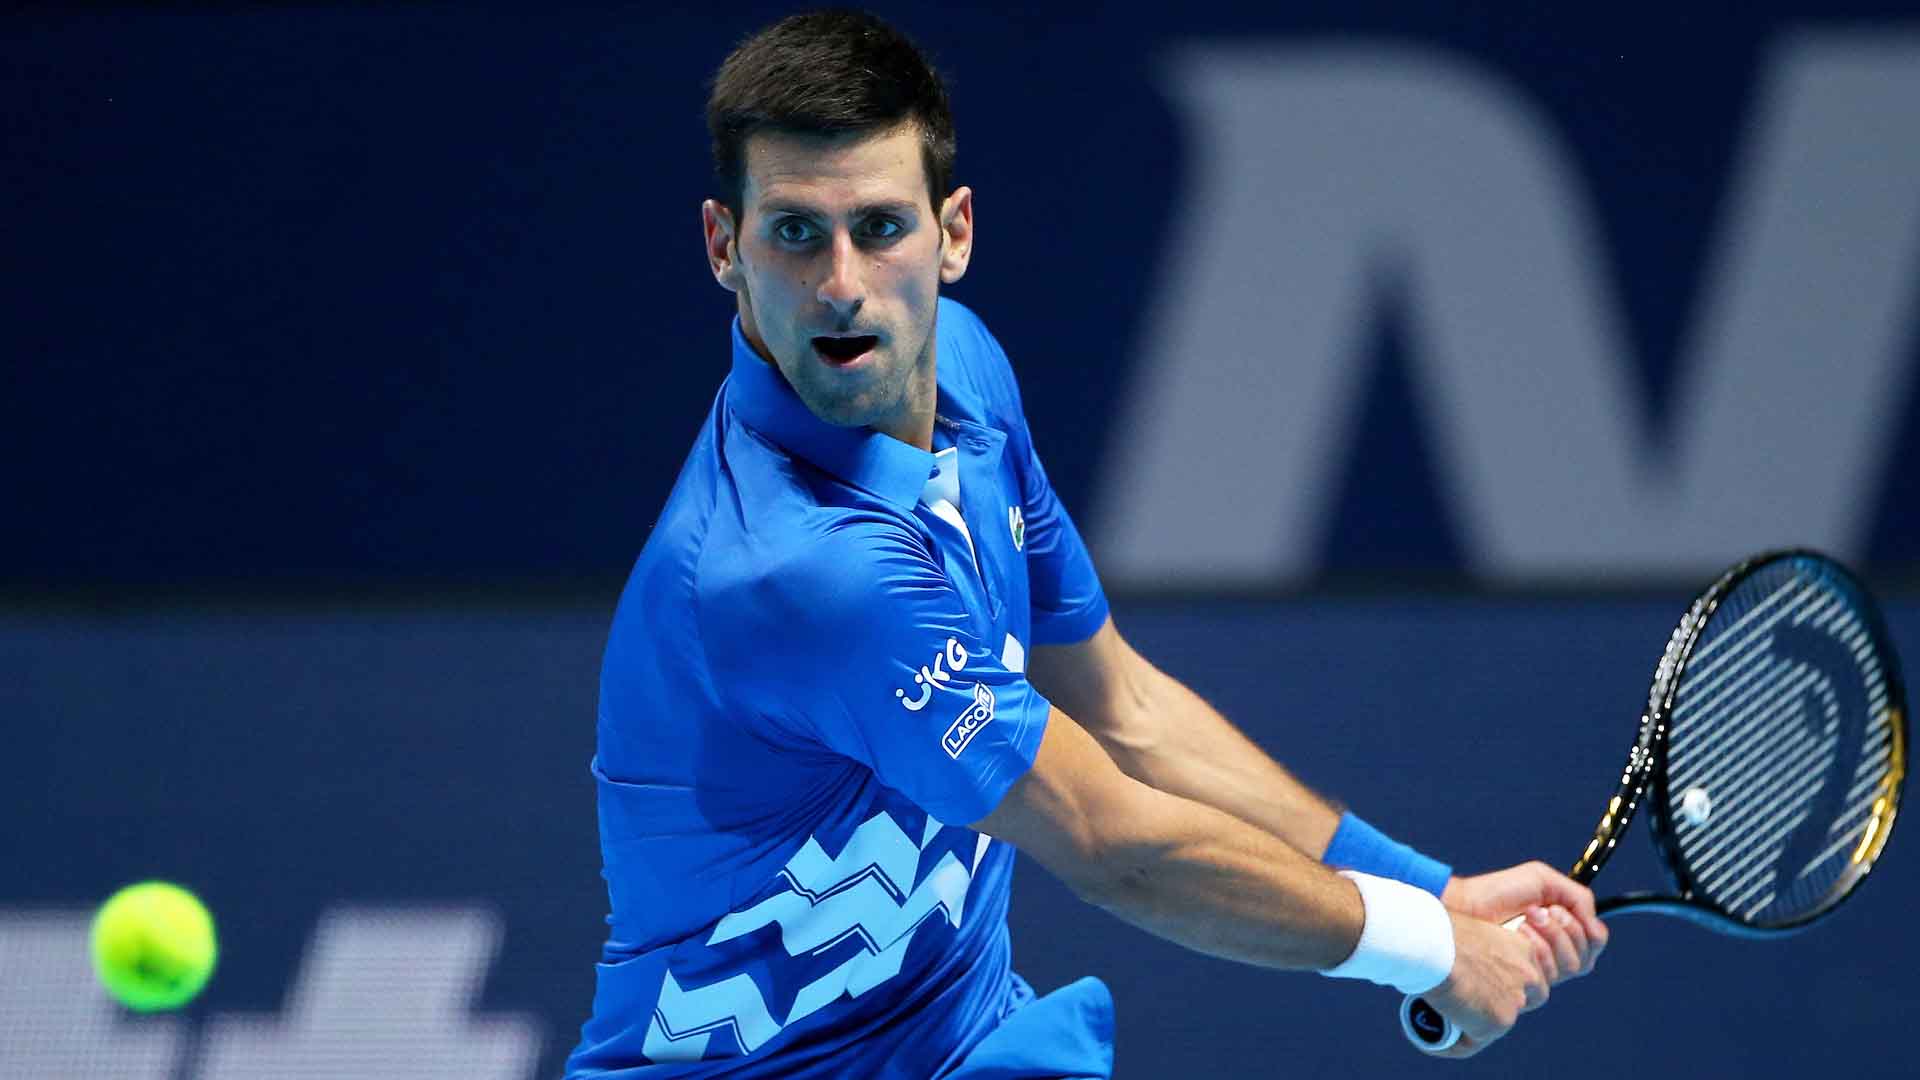 Novak Djokovic will face Alexander Zverev for a place in the Nitto ATP Finals semi-finals on Friday.